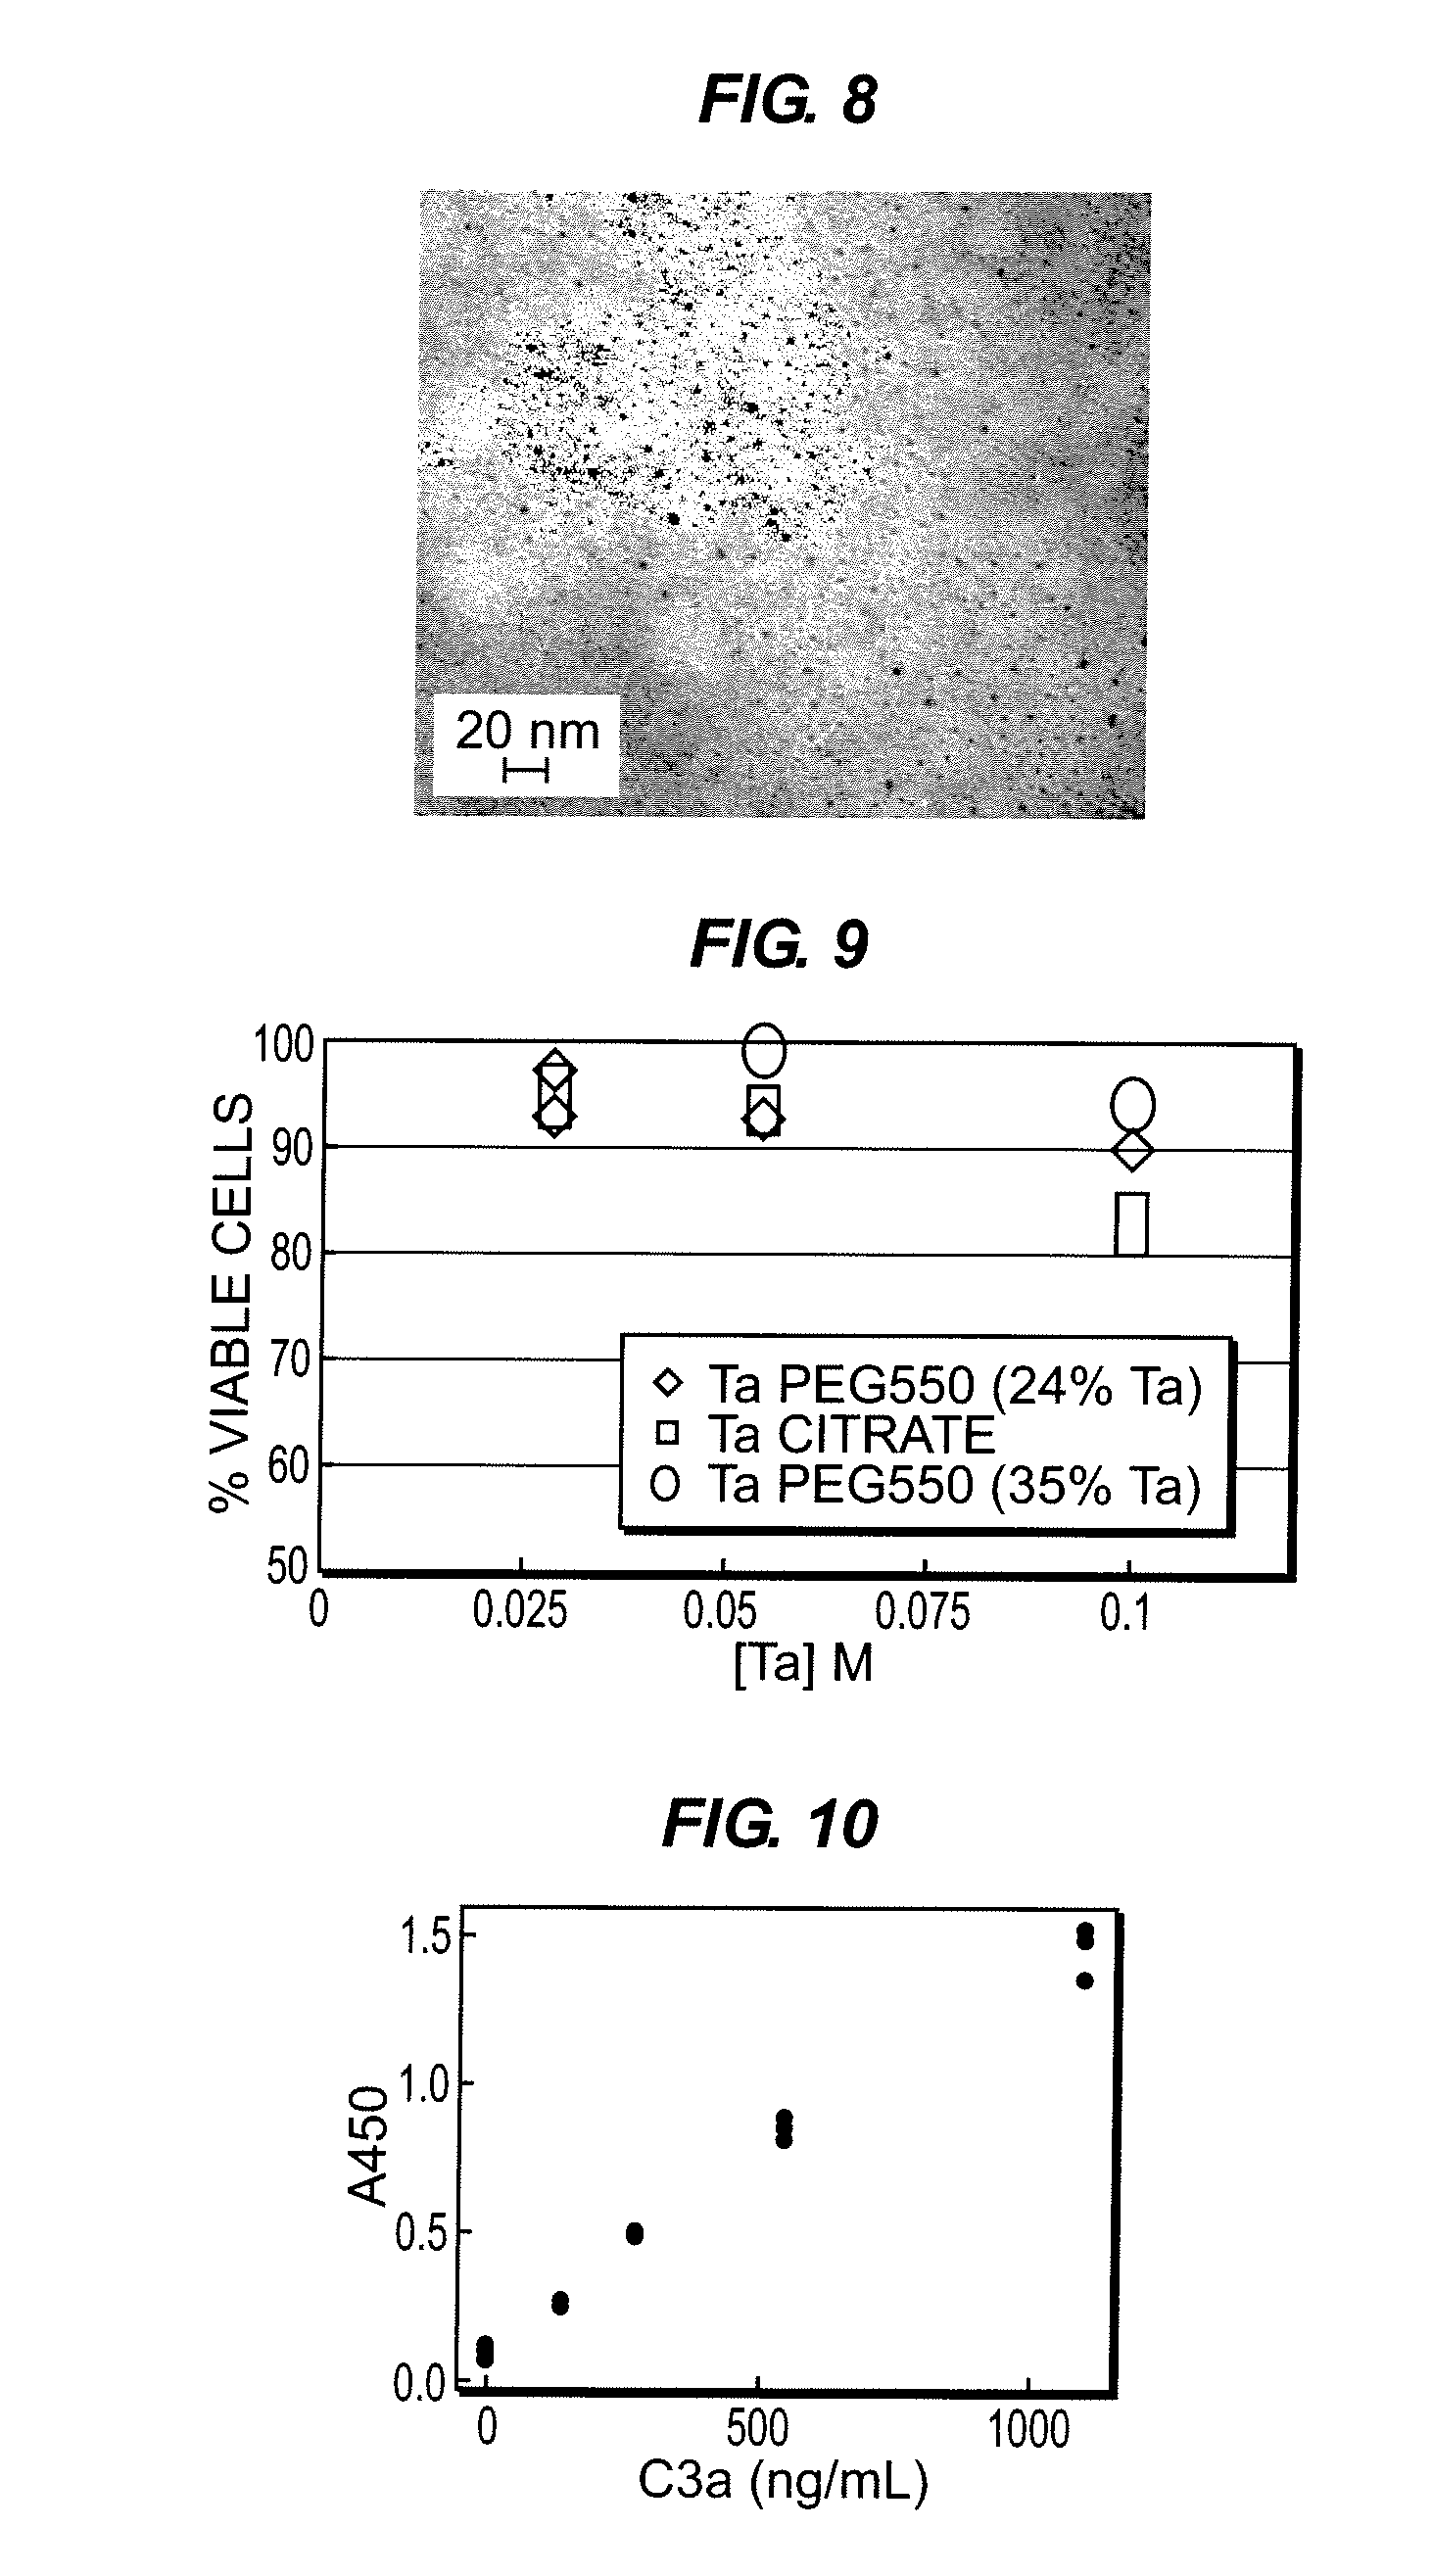 Nanoparticle-based imaging agents for X-ray/computed tomography and methods for making same